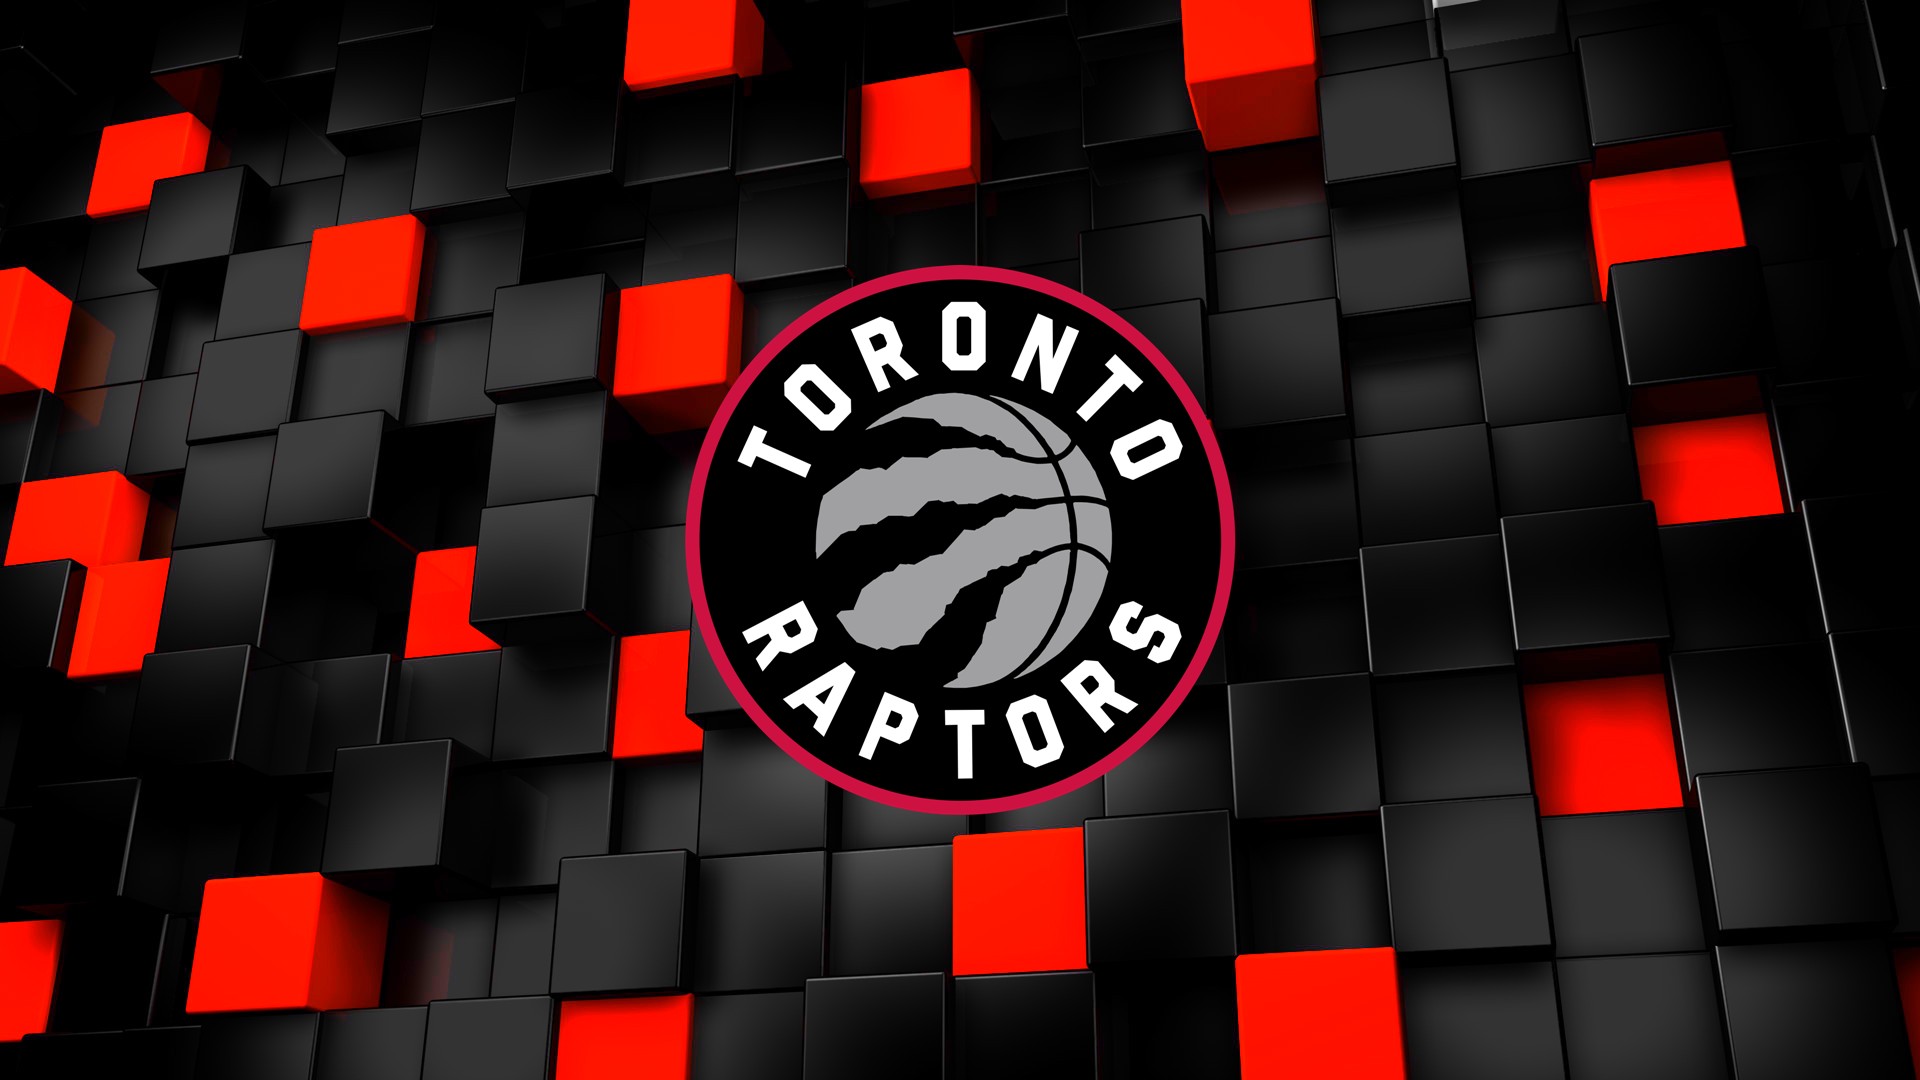 Toronto Raptors Logo For PC Wallpaper with high-resolution 1920x1080 pixel. You can use this wallpaper for your Desktop Computer Backgrounds, Windows or Mac Screensavers, iPhone Lock screen, Tablet or Android and another Mobile Phone device